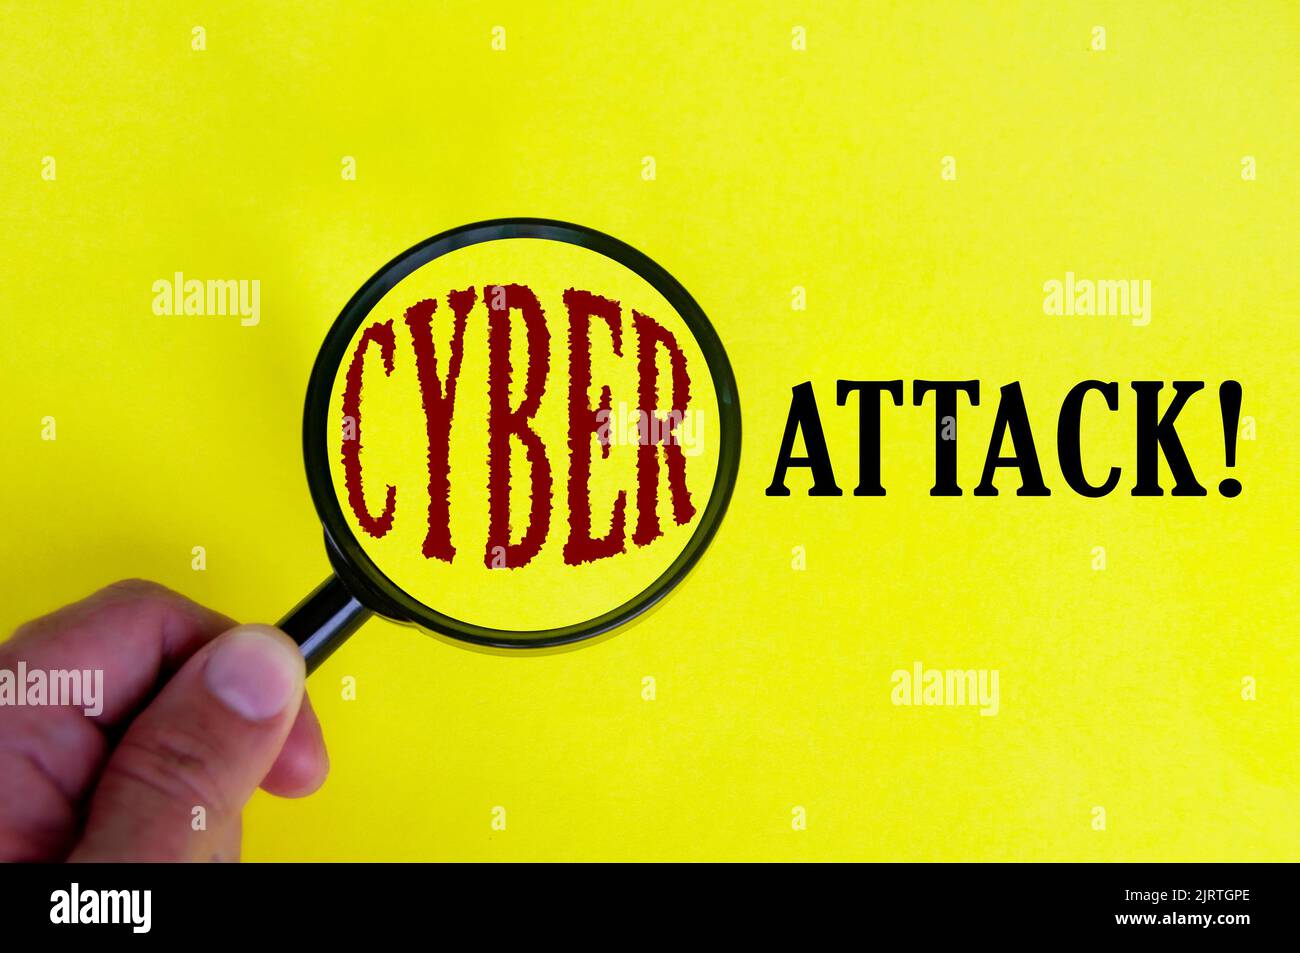 Cyber attack text on yellow cover with hand holding magnifying glass. Internet security concept. Stock Photo